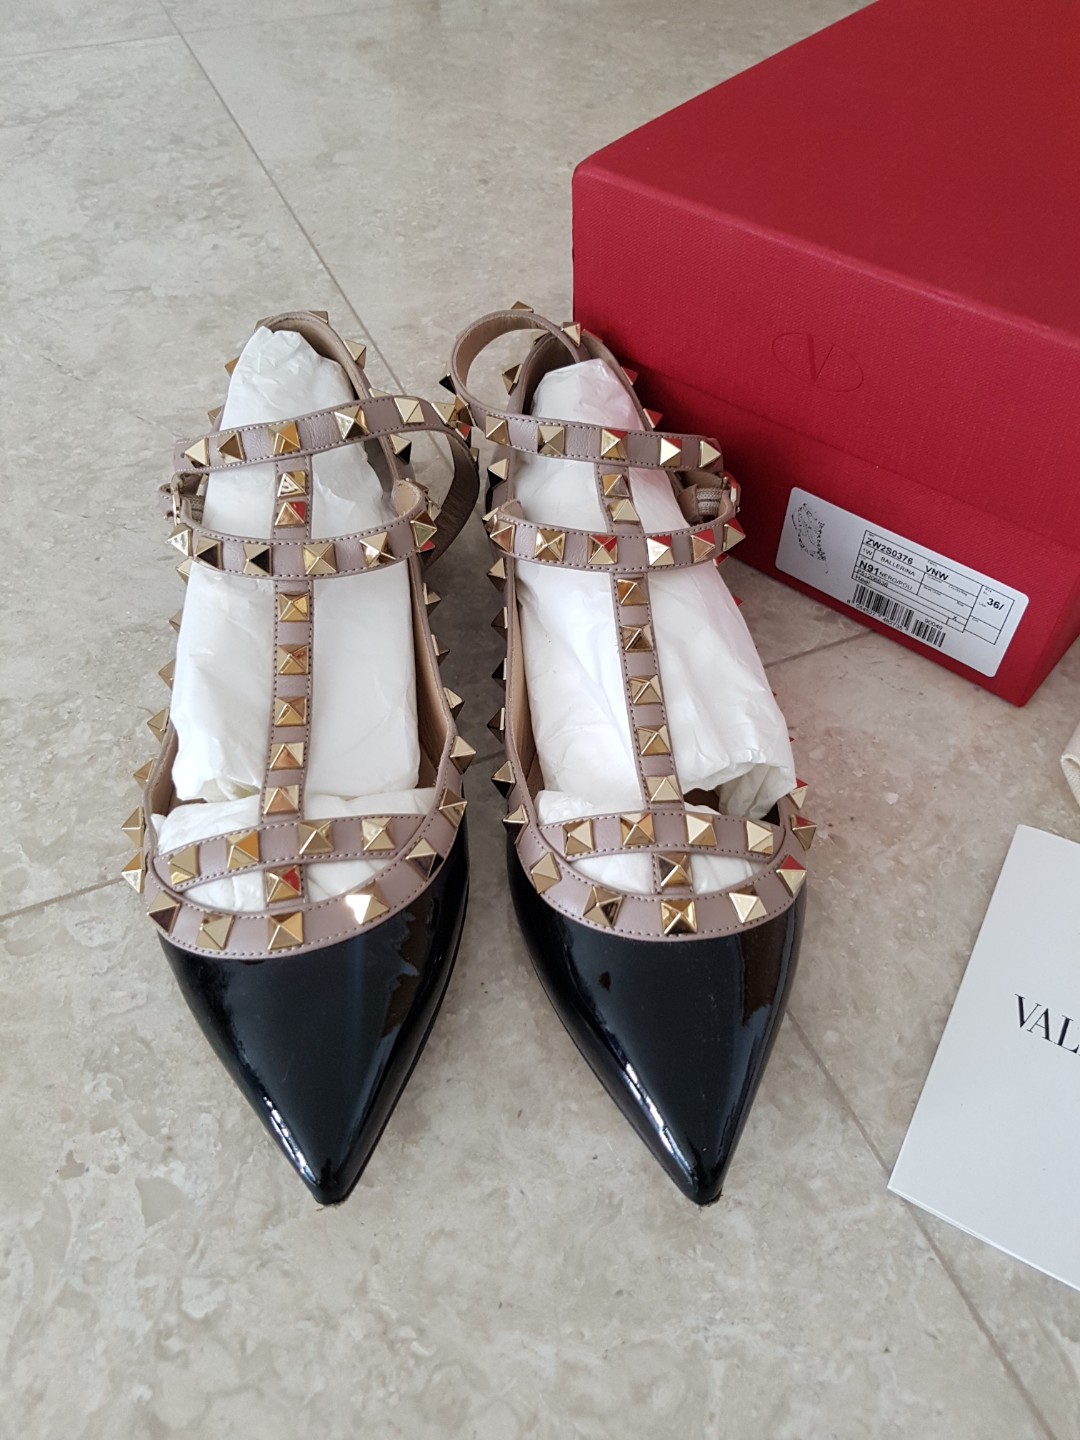 Authentic Valentino Rockstud Caged Flats Women S Fashion Shoes Heels On Carousell